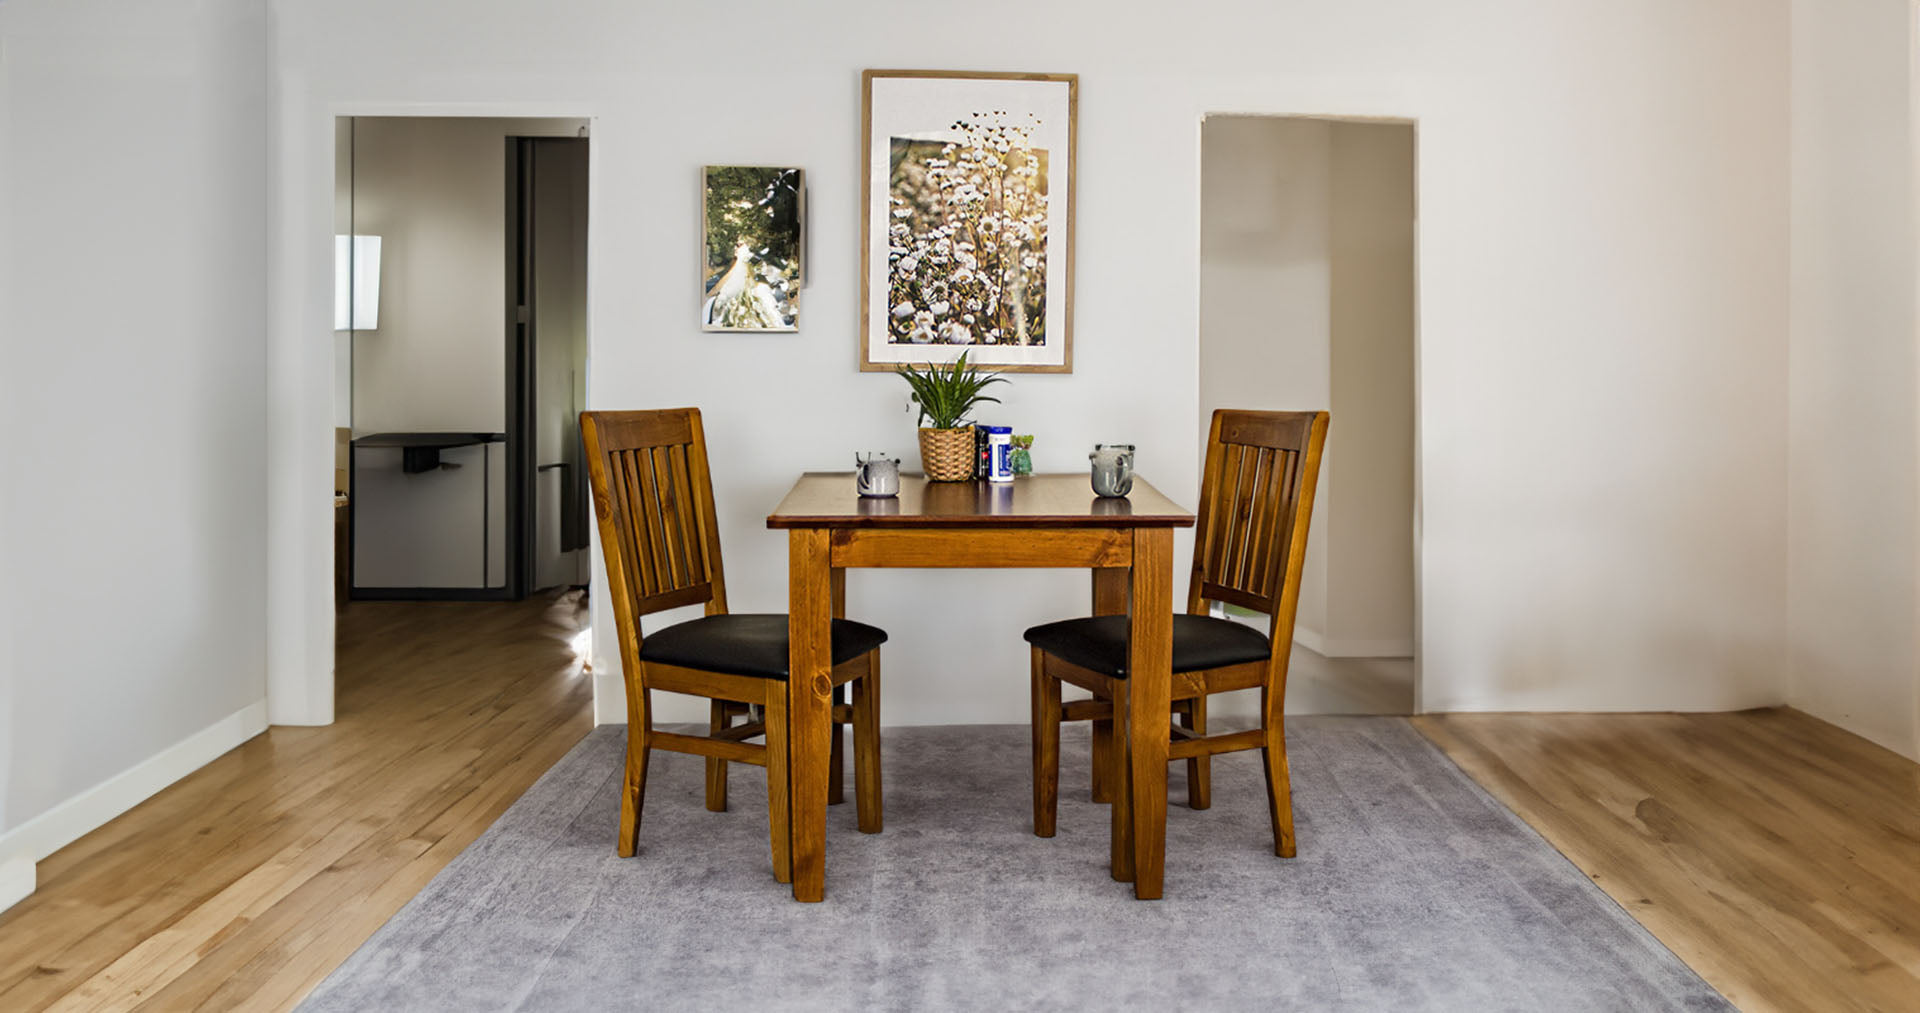 Dining room with light gray walls and wooden floorboards. There is a large gray rug in the middle of the room with a Hamilton 3 PIece Dining Suite on top, with a Hamilton Square Rimu Stained Dining Table, which has two coffee mugs, a potted plant and a salt and pepper shaker on top. There are two Hamilton Rimu-stained upholstered Dining Chairs on opposite ends of the dining table. There are two framed artworks on the back wall above the dining table and chairs.